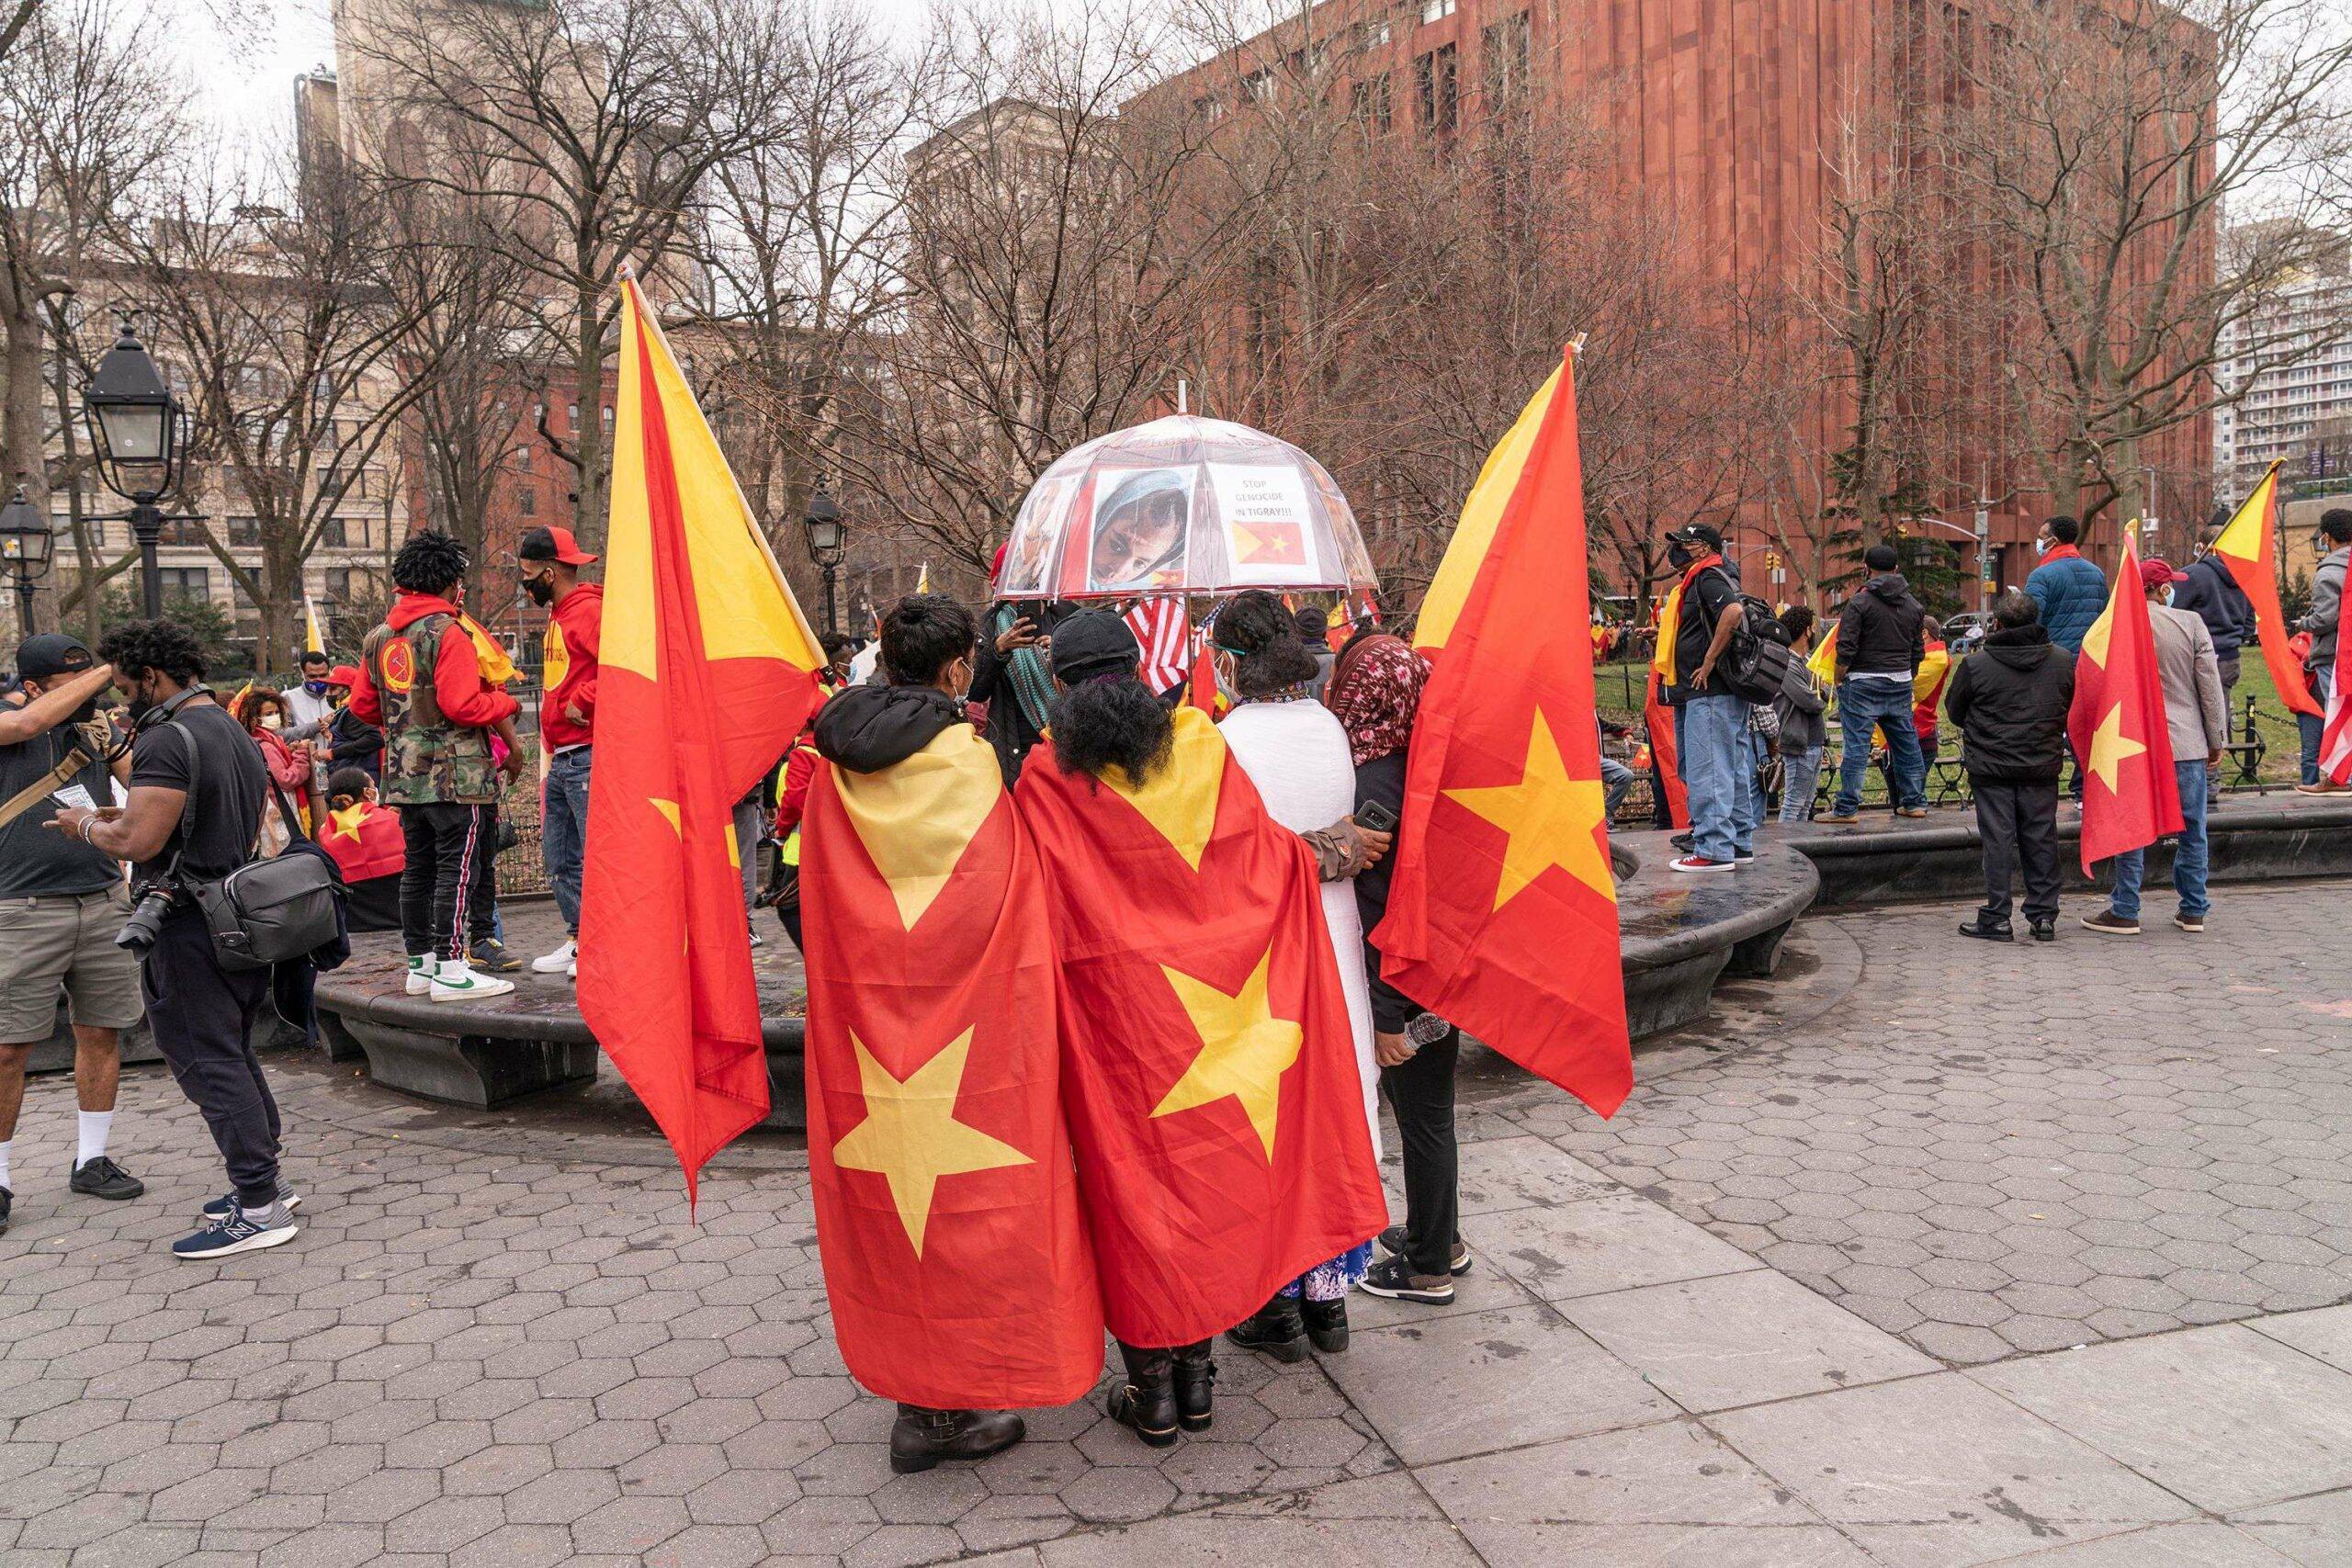 Mandatory Credit: Photo by Lev Radin/Pacific Press/Shutterstock (11833717g)
Protesters with Tigray flags and posters staged rally on Washington Square and walk along Broadway demanding end of Ethiopia offence on civilians. Conflict between Tigray Regional Government and Ethiopian Government started in 2019 and escalated into an open war on November 4, 2020. More than 2.3 million children are cut off from desperately needed aid and humanitarian assistance. Many protesters were wearing jackets, hat and facial masks in colors of Tigray flag.
Members of Tigray diaspora of the US rally and march, New York, United States - 26 Mar 2021/shutterstock_editorial_Members_of_Tigray_diaspora_of_th_11833717G//2103270711